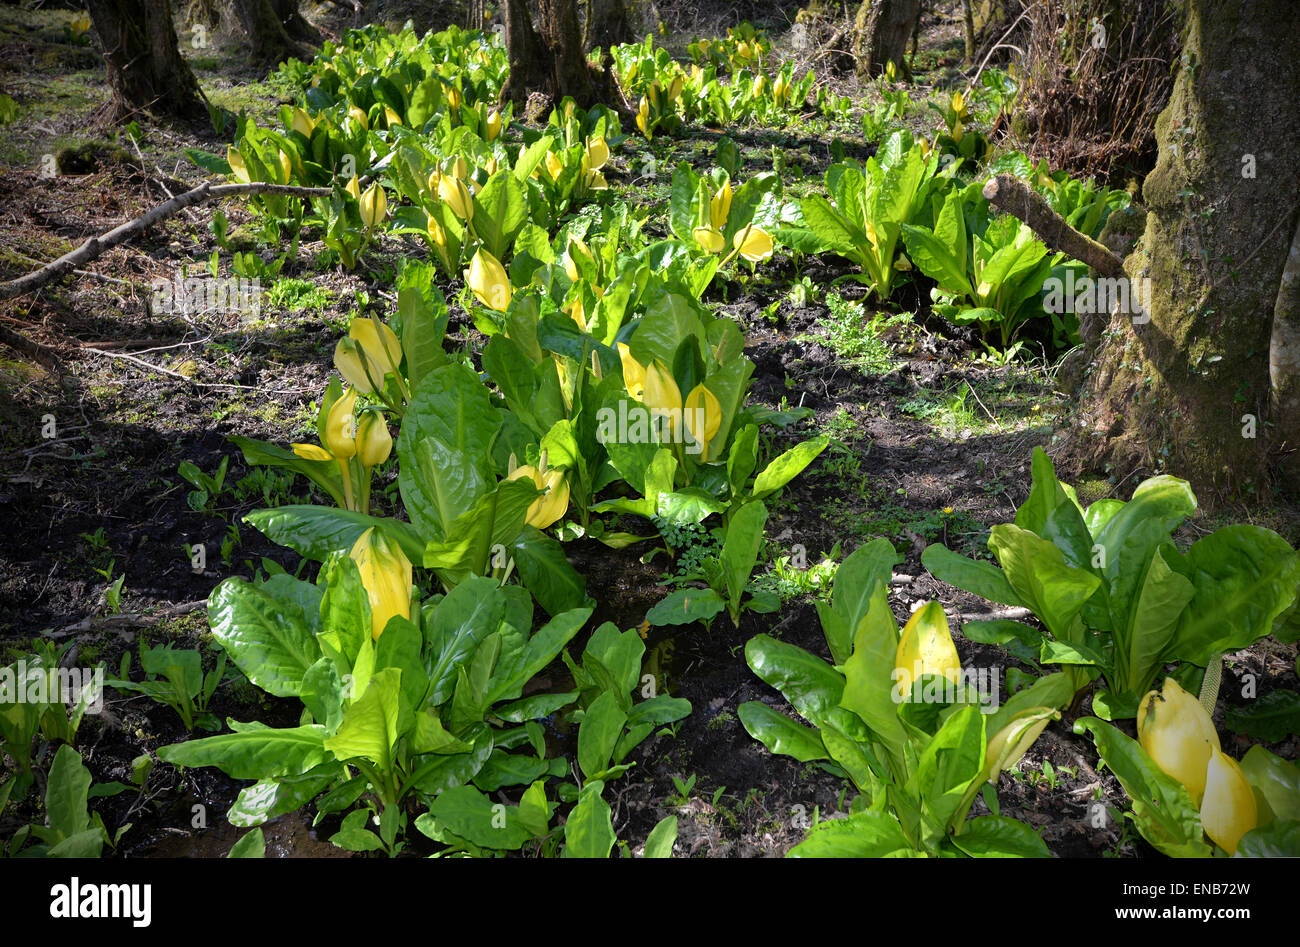 Yellow Skunk cabbage (Lysichiton Americanus) growing in a marshy area in South Devon, UK. Also known as American Skunk Cabbage. Stock Photo